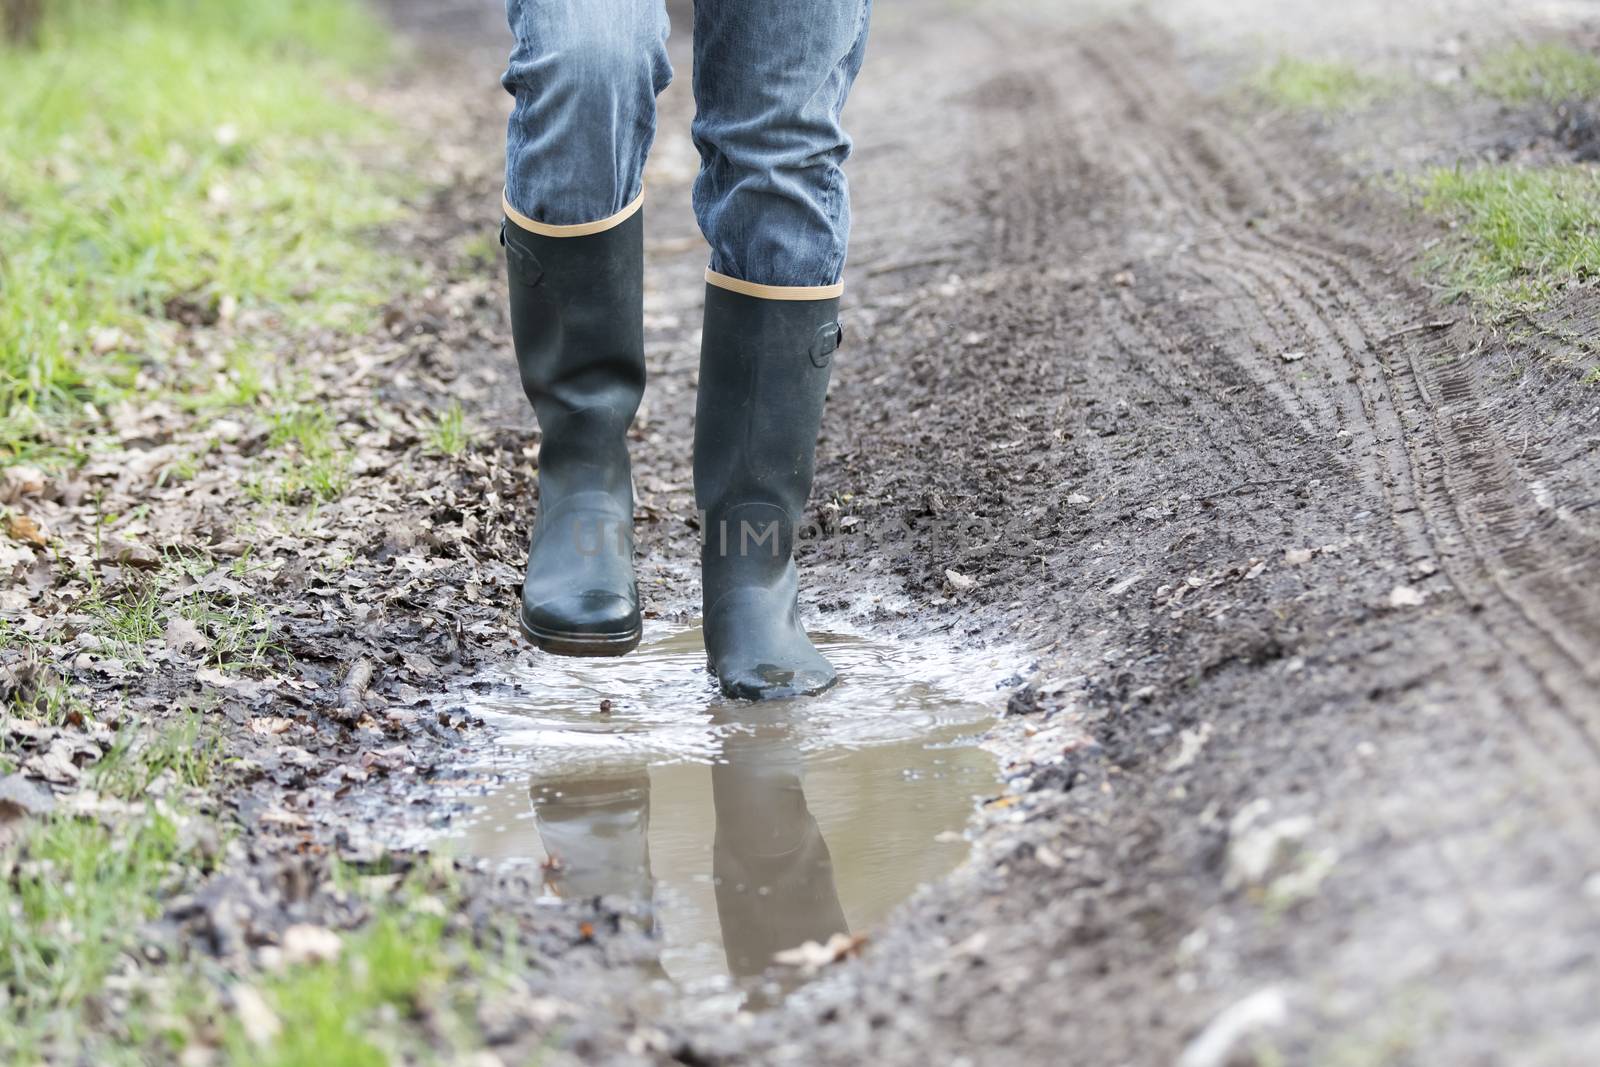 Man with rubber boots walking on rural path